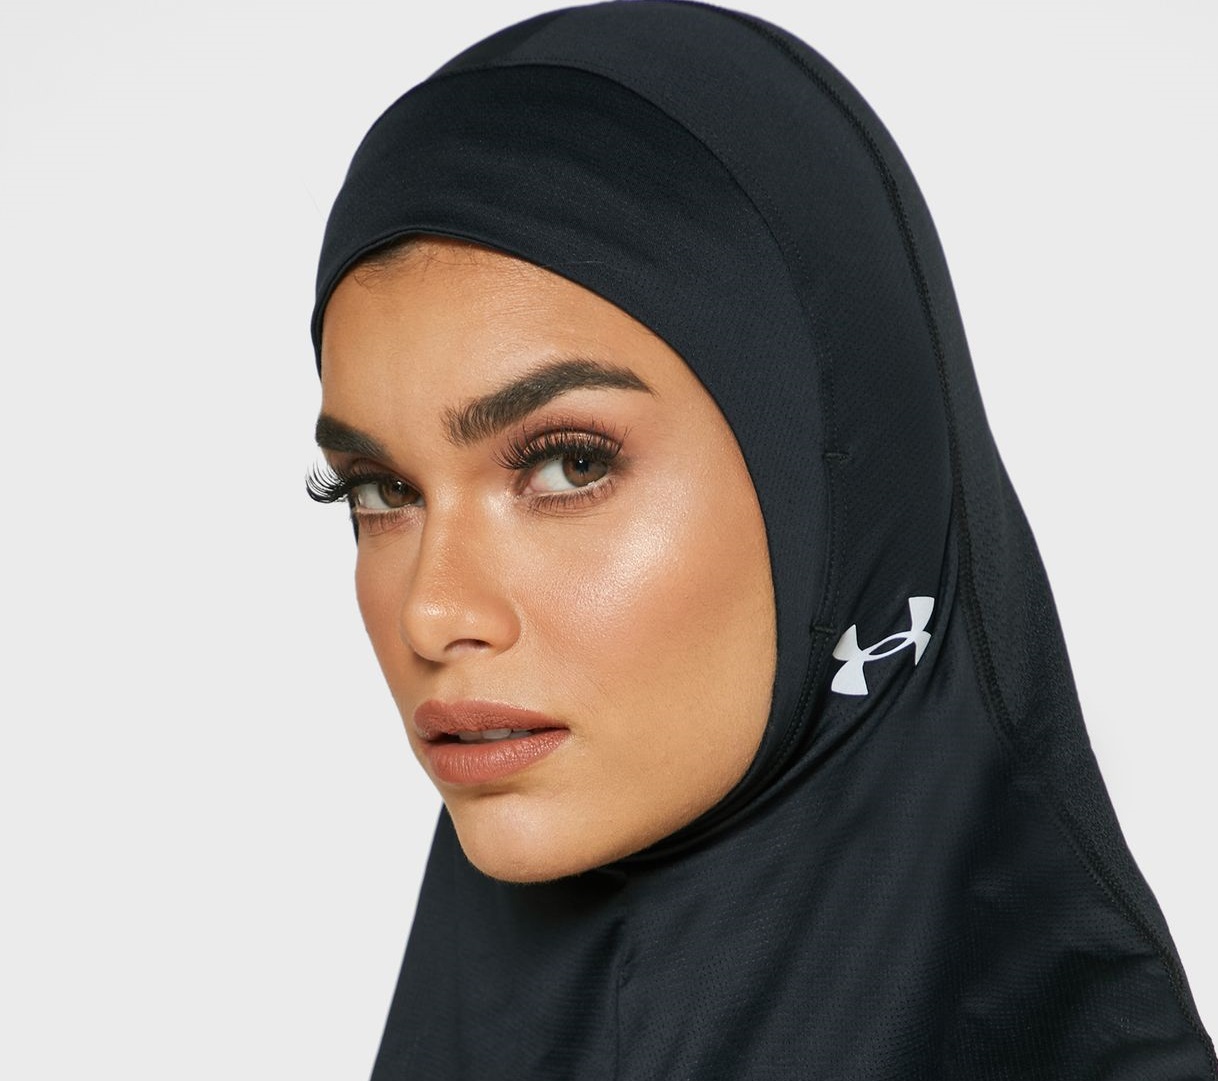 Under Armour Launch Their First Sports Hijab For Women - GQ Middle